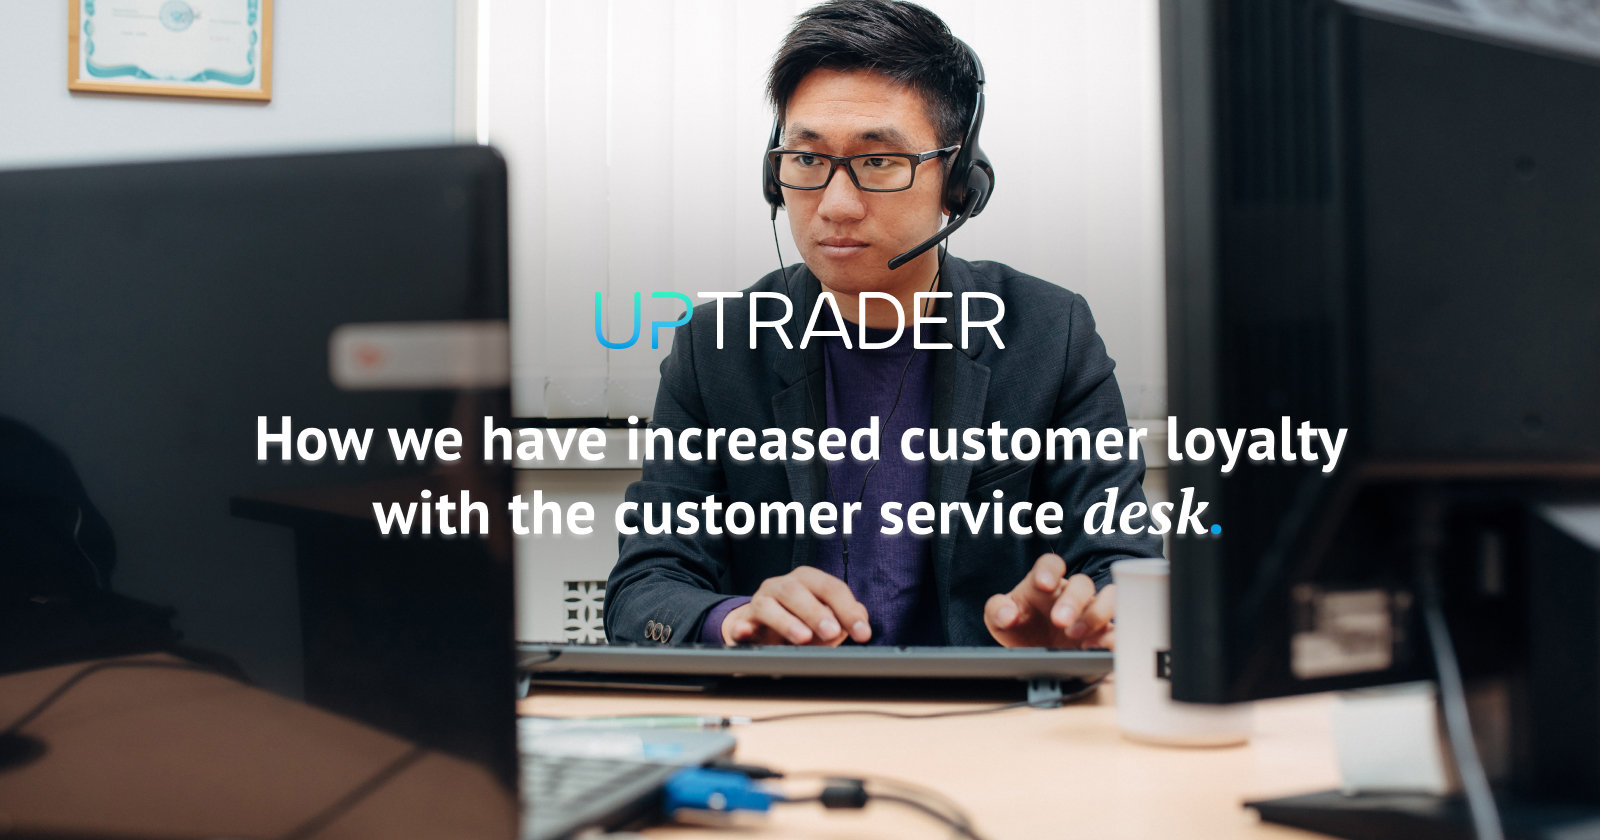 Customer service as a method to increase customer loyalty and retention for Forex CRM Provider